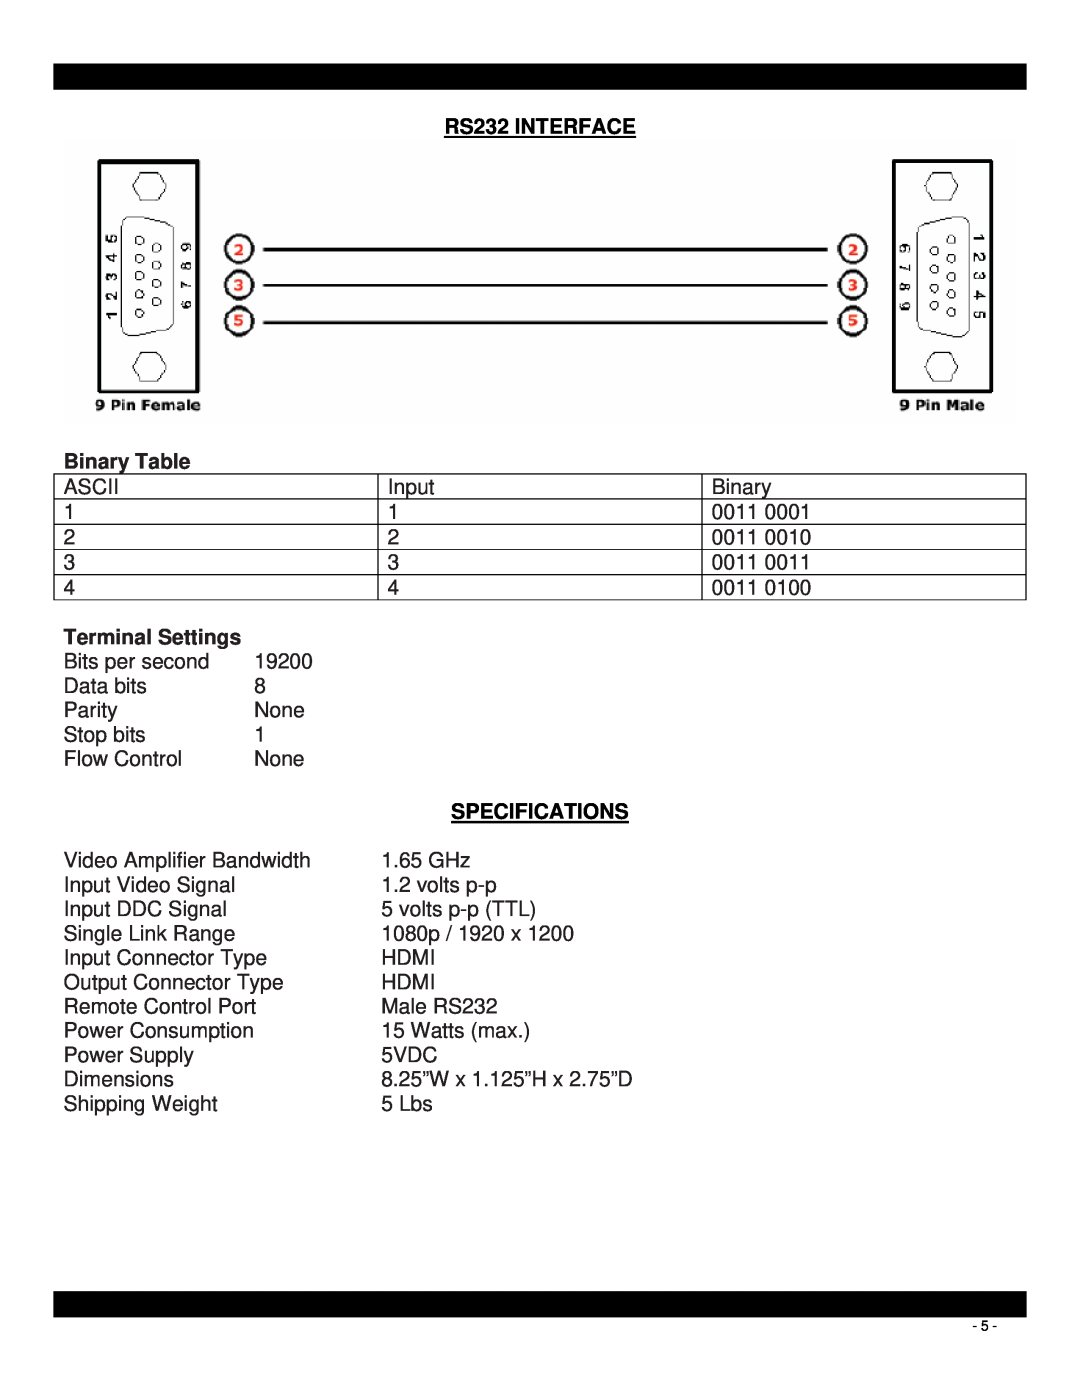 Xantech HDMI4X1 user manual RS232 INTERFACE, Binary Table, Terminal Settings, Specifications 